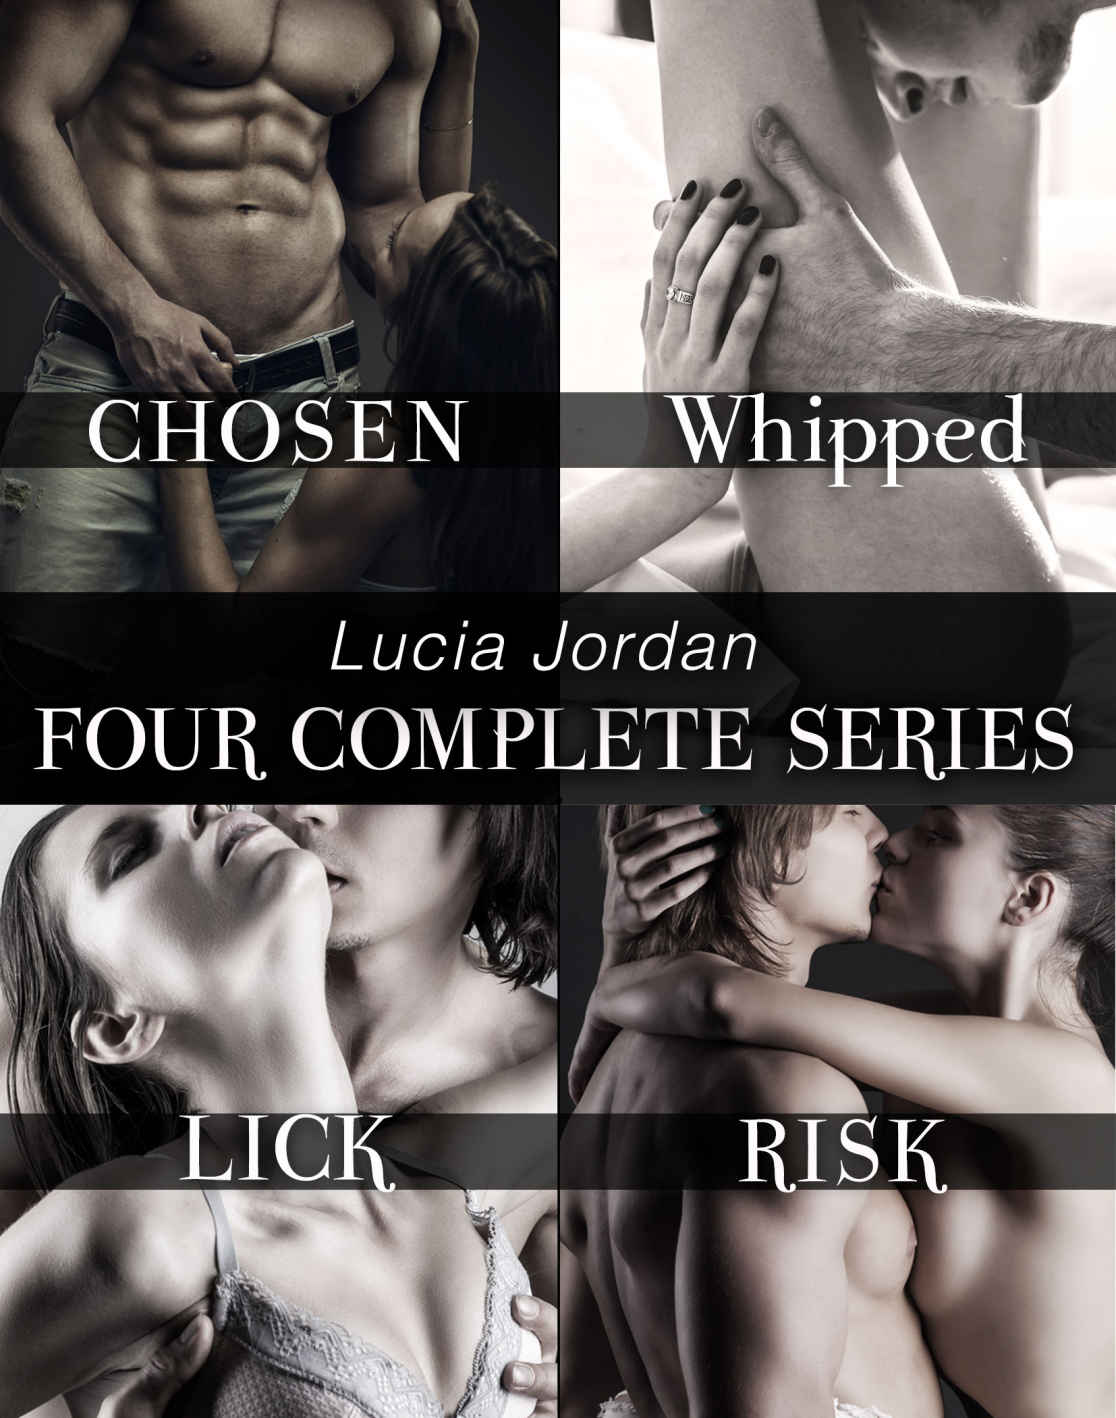 Lucia Jordan's Four Series Collection: Chosen, Whipped, Lick, Risk